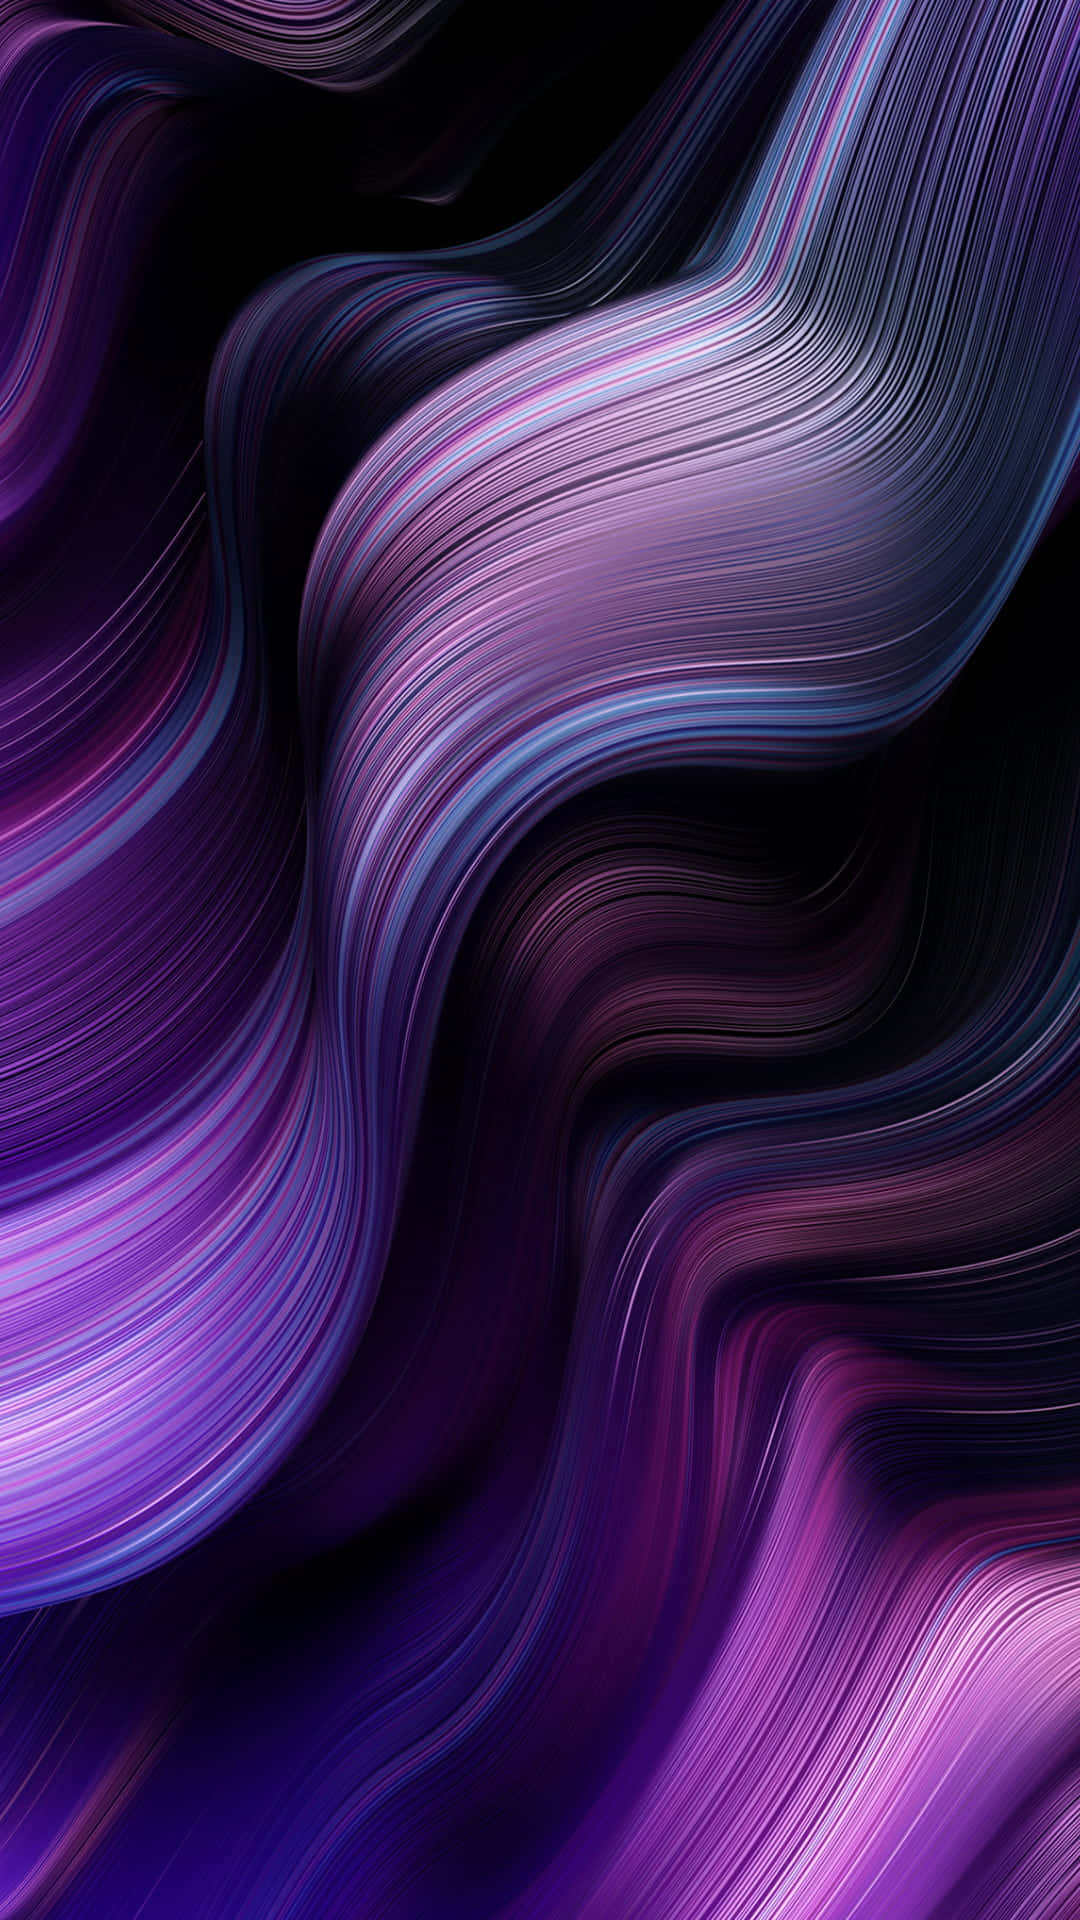 Brightly colored abstract wavy background